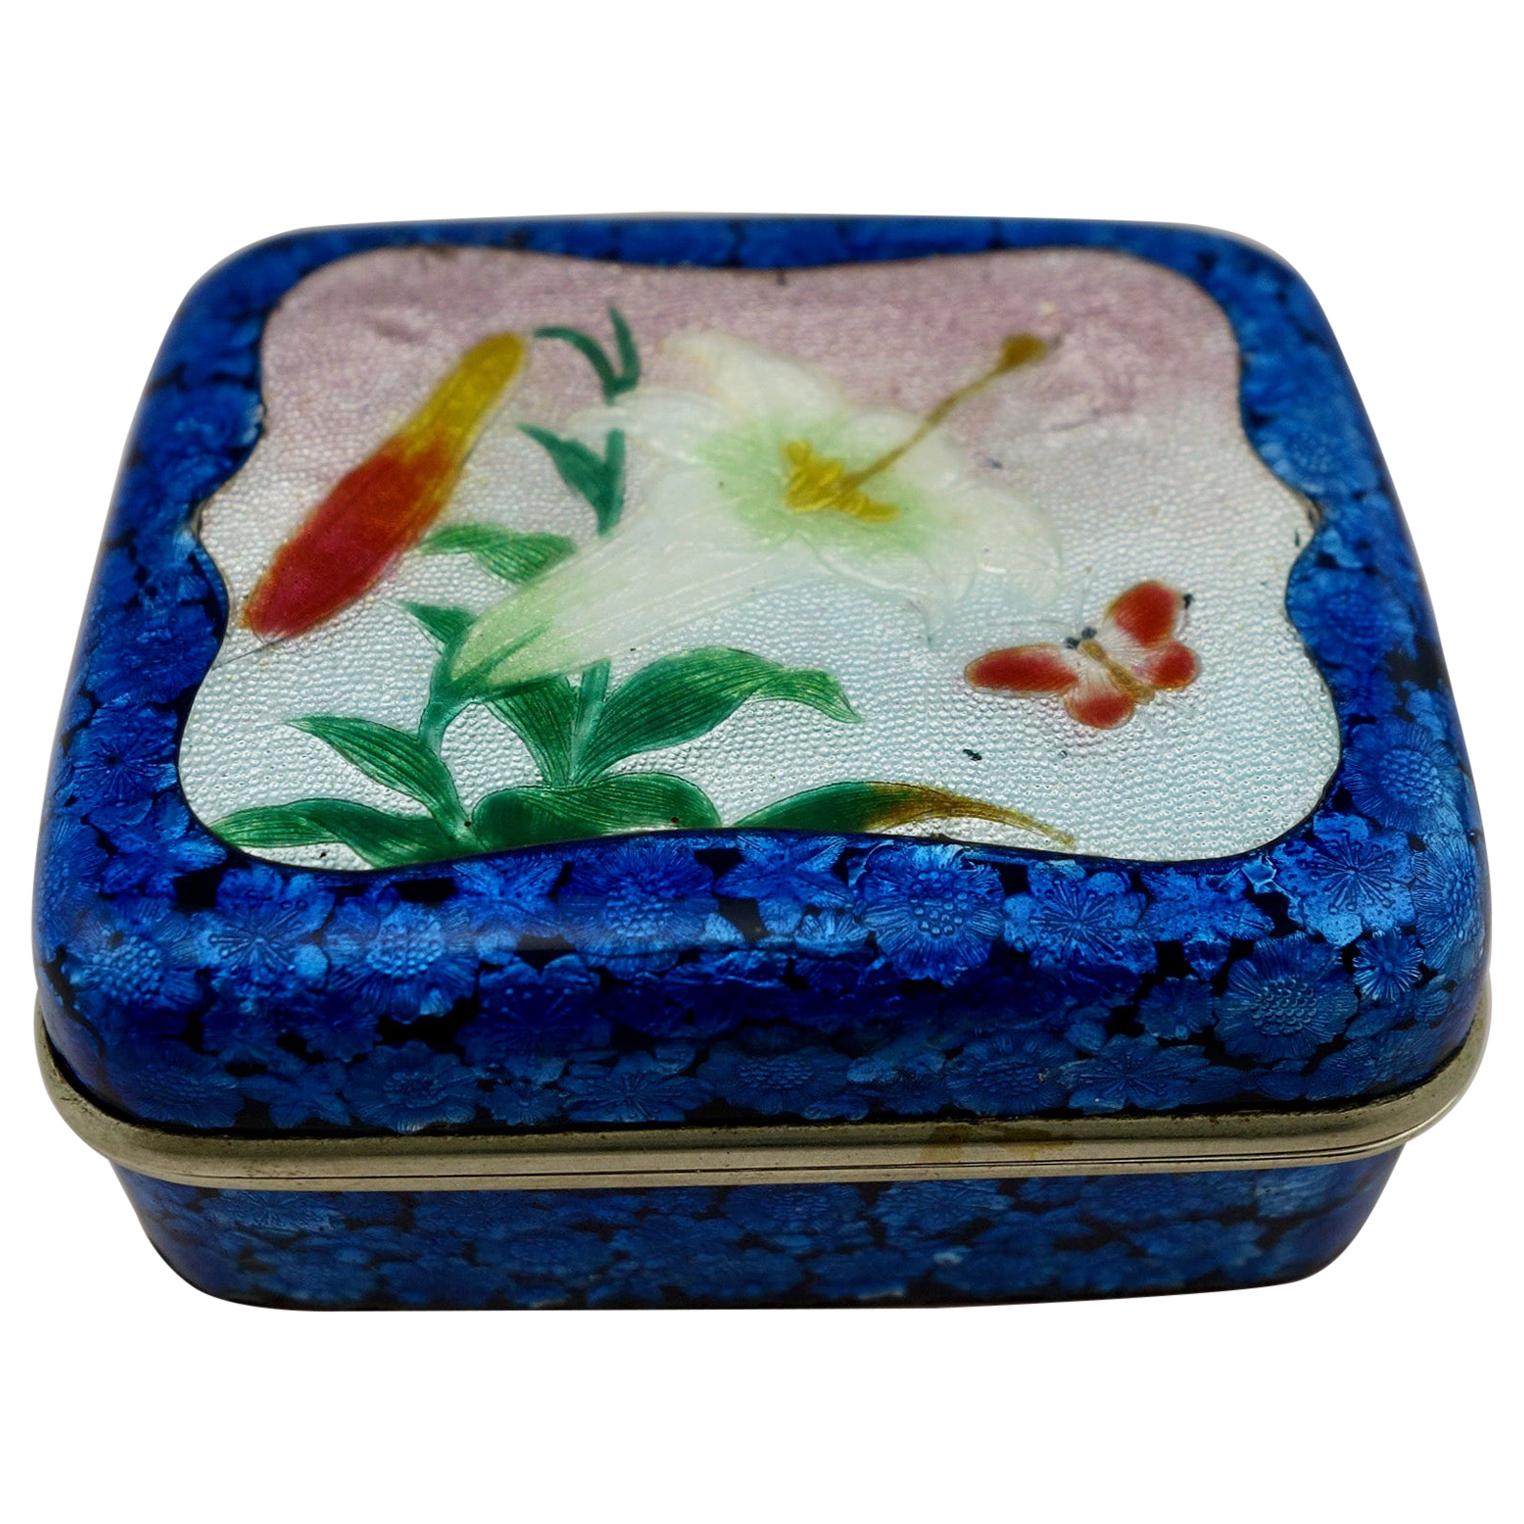 Japanese Meiji Ginbari Cloisonne Finely Decorated Floral Box